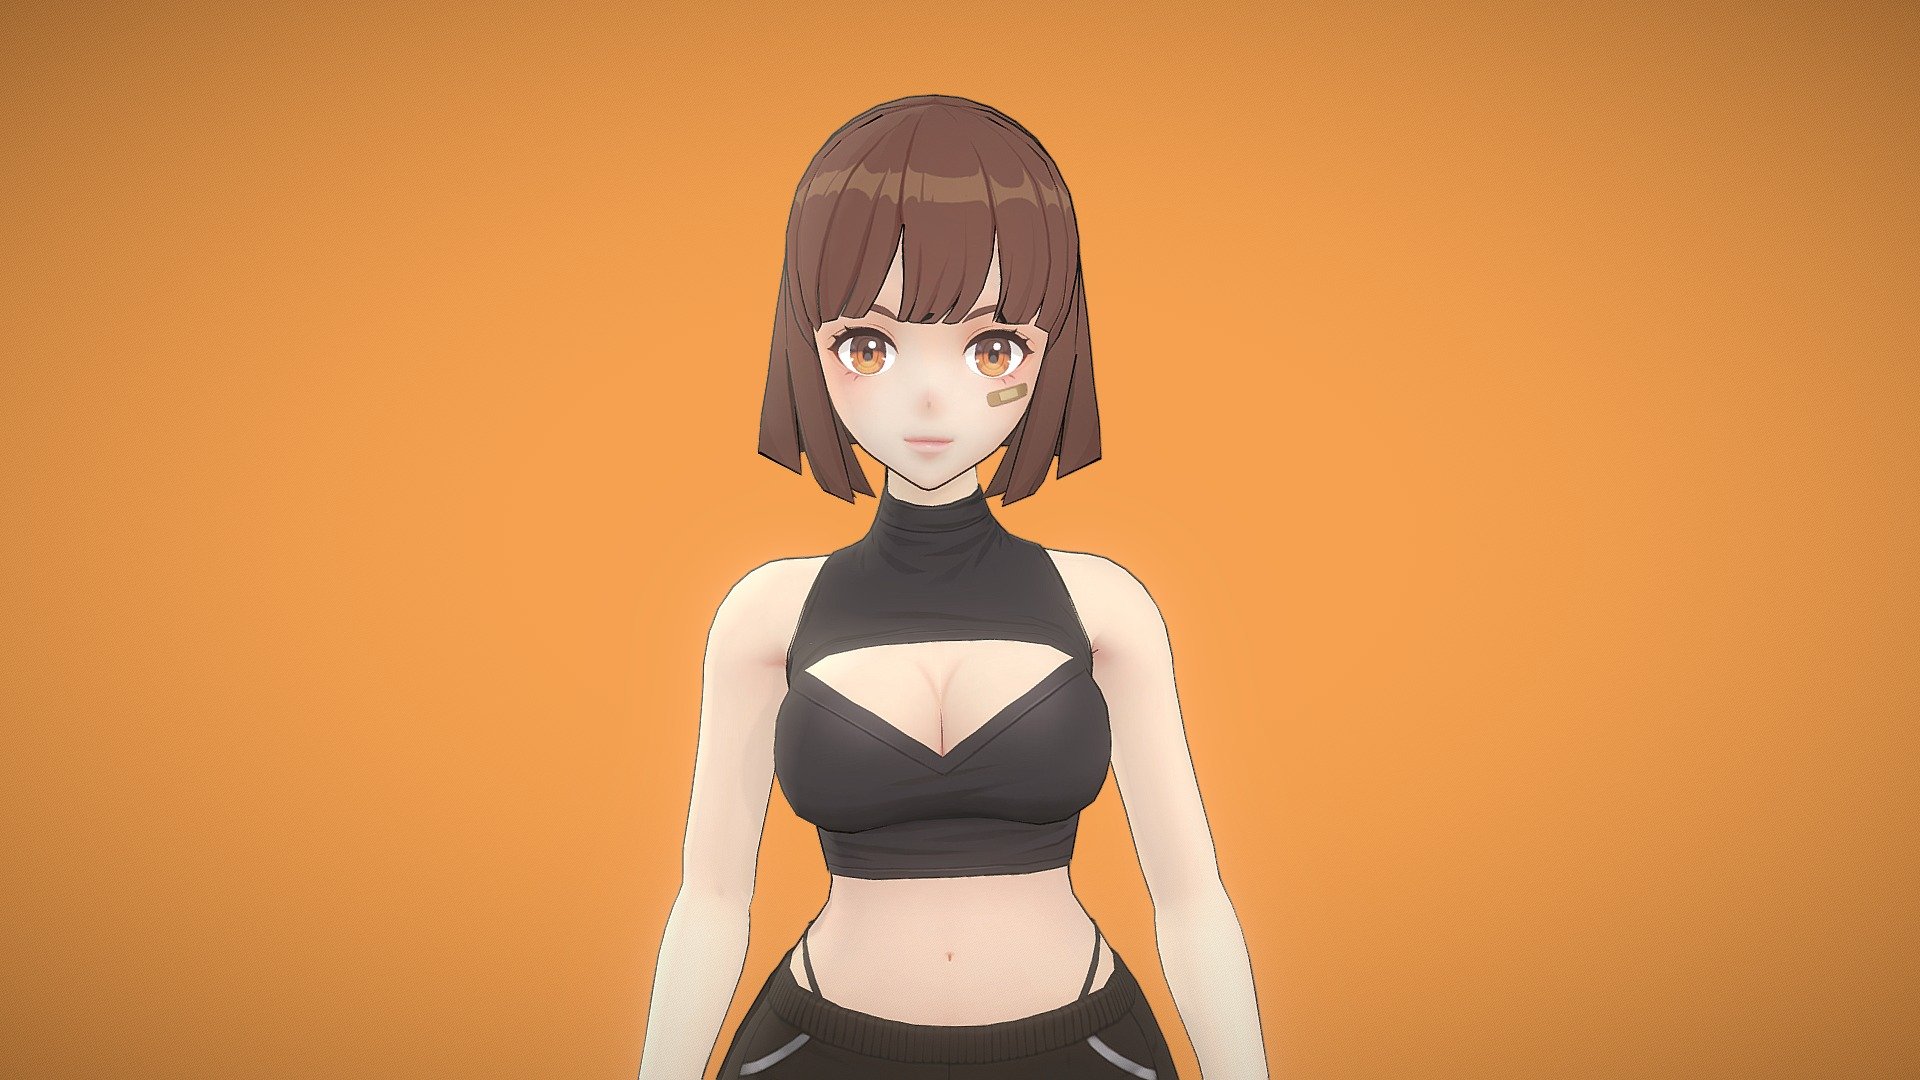 Hello,

I planned a character with a school concept for my project and personally created a Level 1 character concept, which I then produced using 3D modeling. Additionally, I have uploaded it to Sketchfab, making it available to view in a 3D viewer.
I hope it will be helpful to those who are studying.
Thank you.

저는 프로젝트에서 스쿨컨셉에 캐릭터를 기획했고, 레벨 1 캐릭터 컨셉을 직접 만들어 3D 모델링으로 제작했습니다.
또한, Sketchfab에 업로드하여 3D 뷰어로 볼 수 있도록 했습니다.
공부하는 분들에게 도움이 되길 바랍니다.
감사합니다.

ⓒ 2023. (NovaCore) all rights reserved 3d model